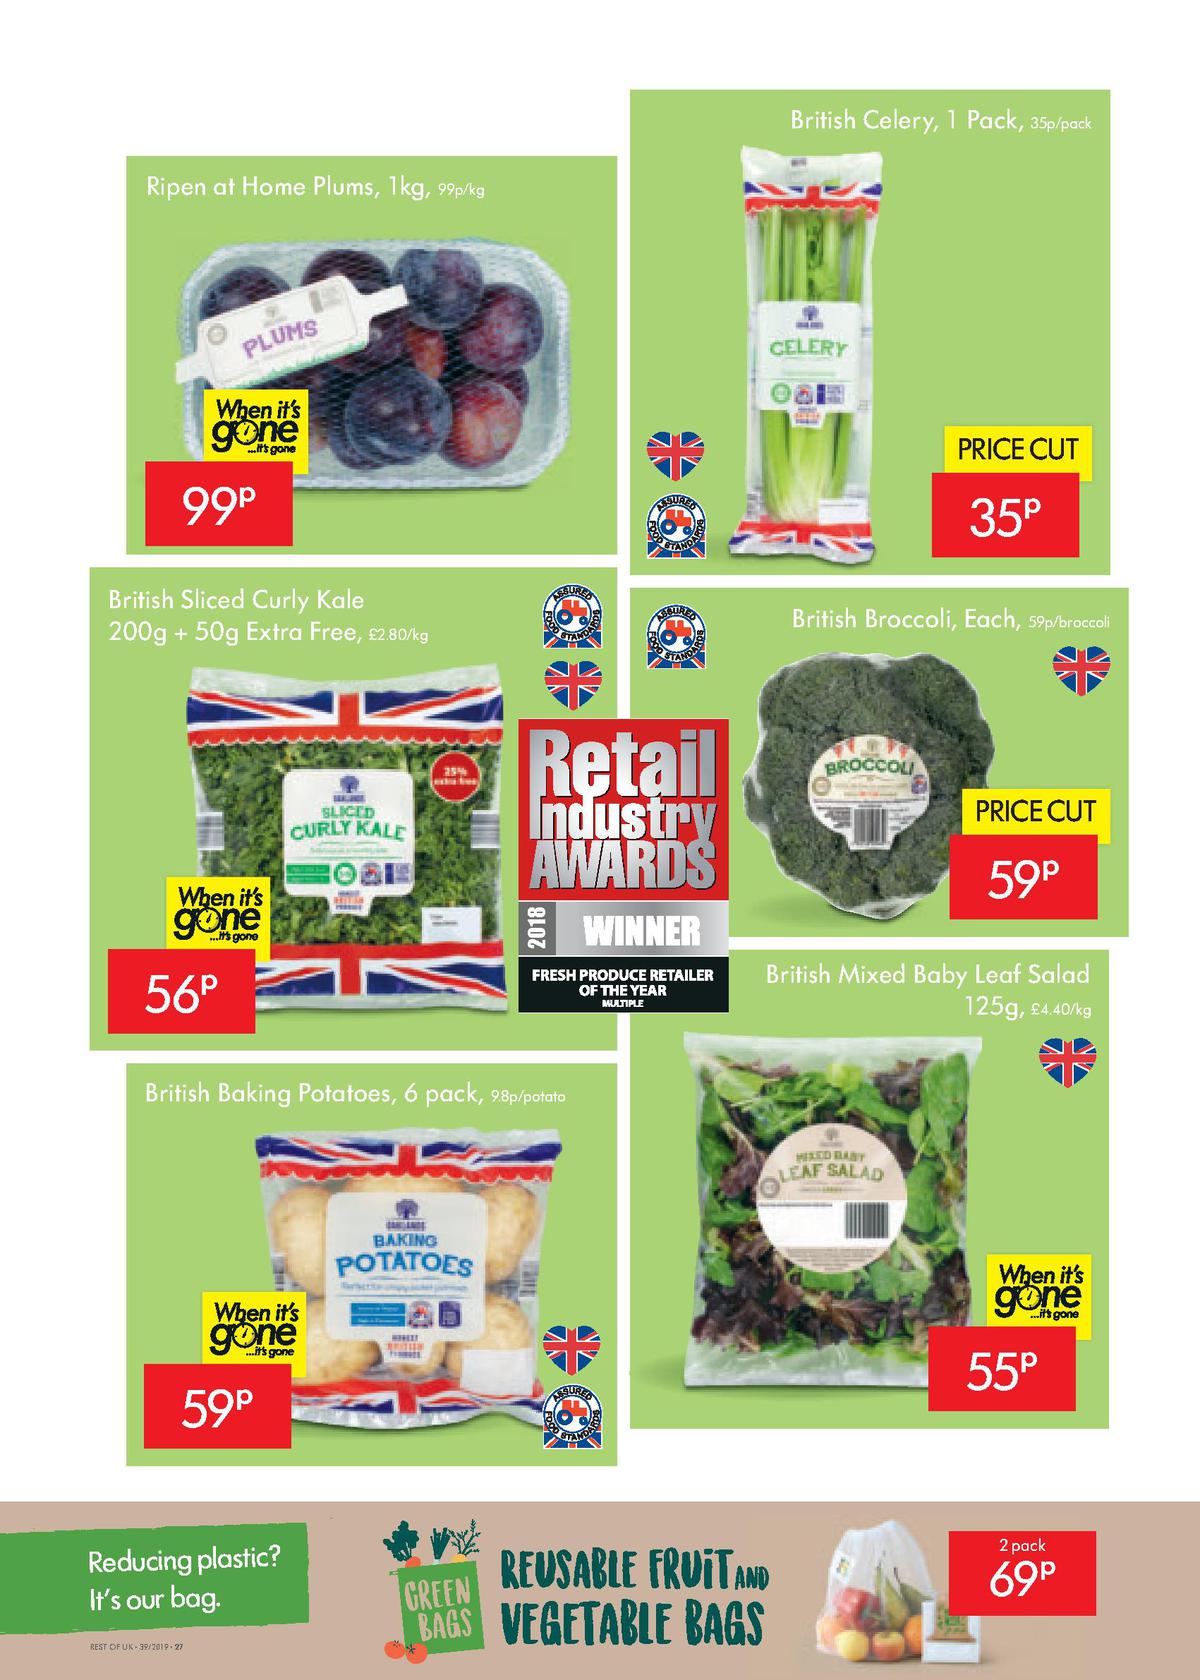 LIDL Offers from 26 September